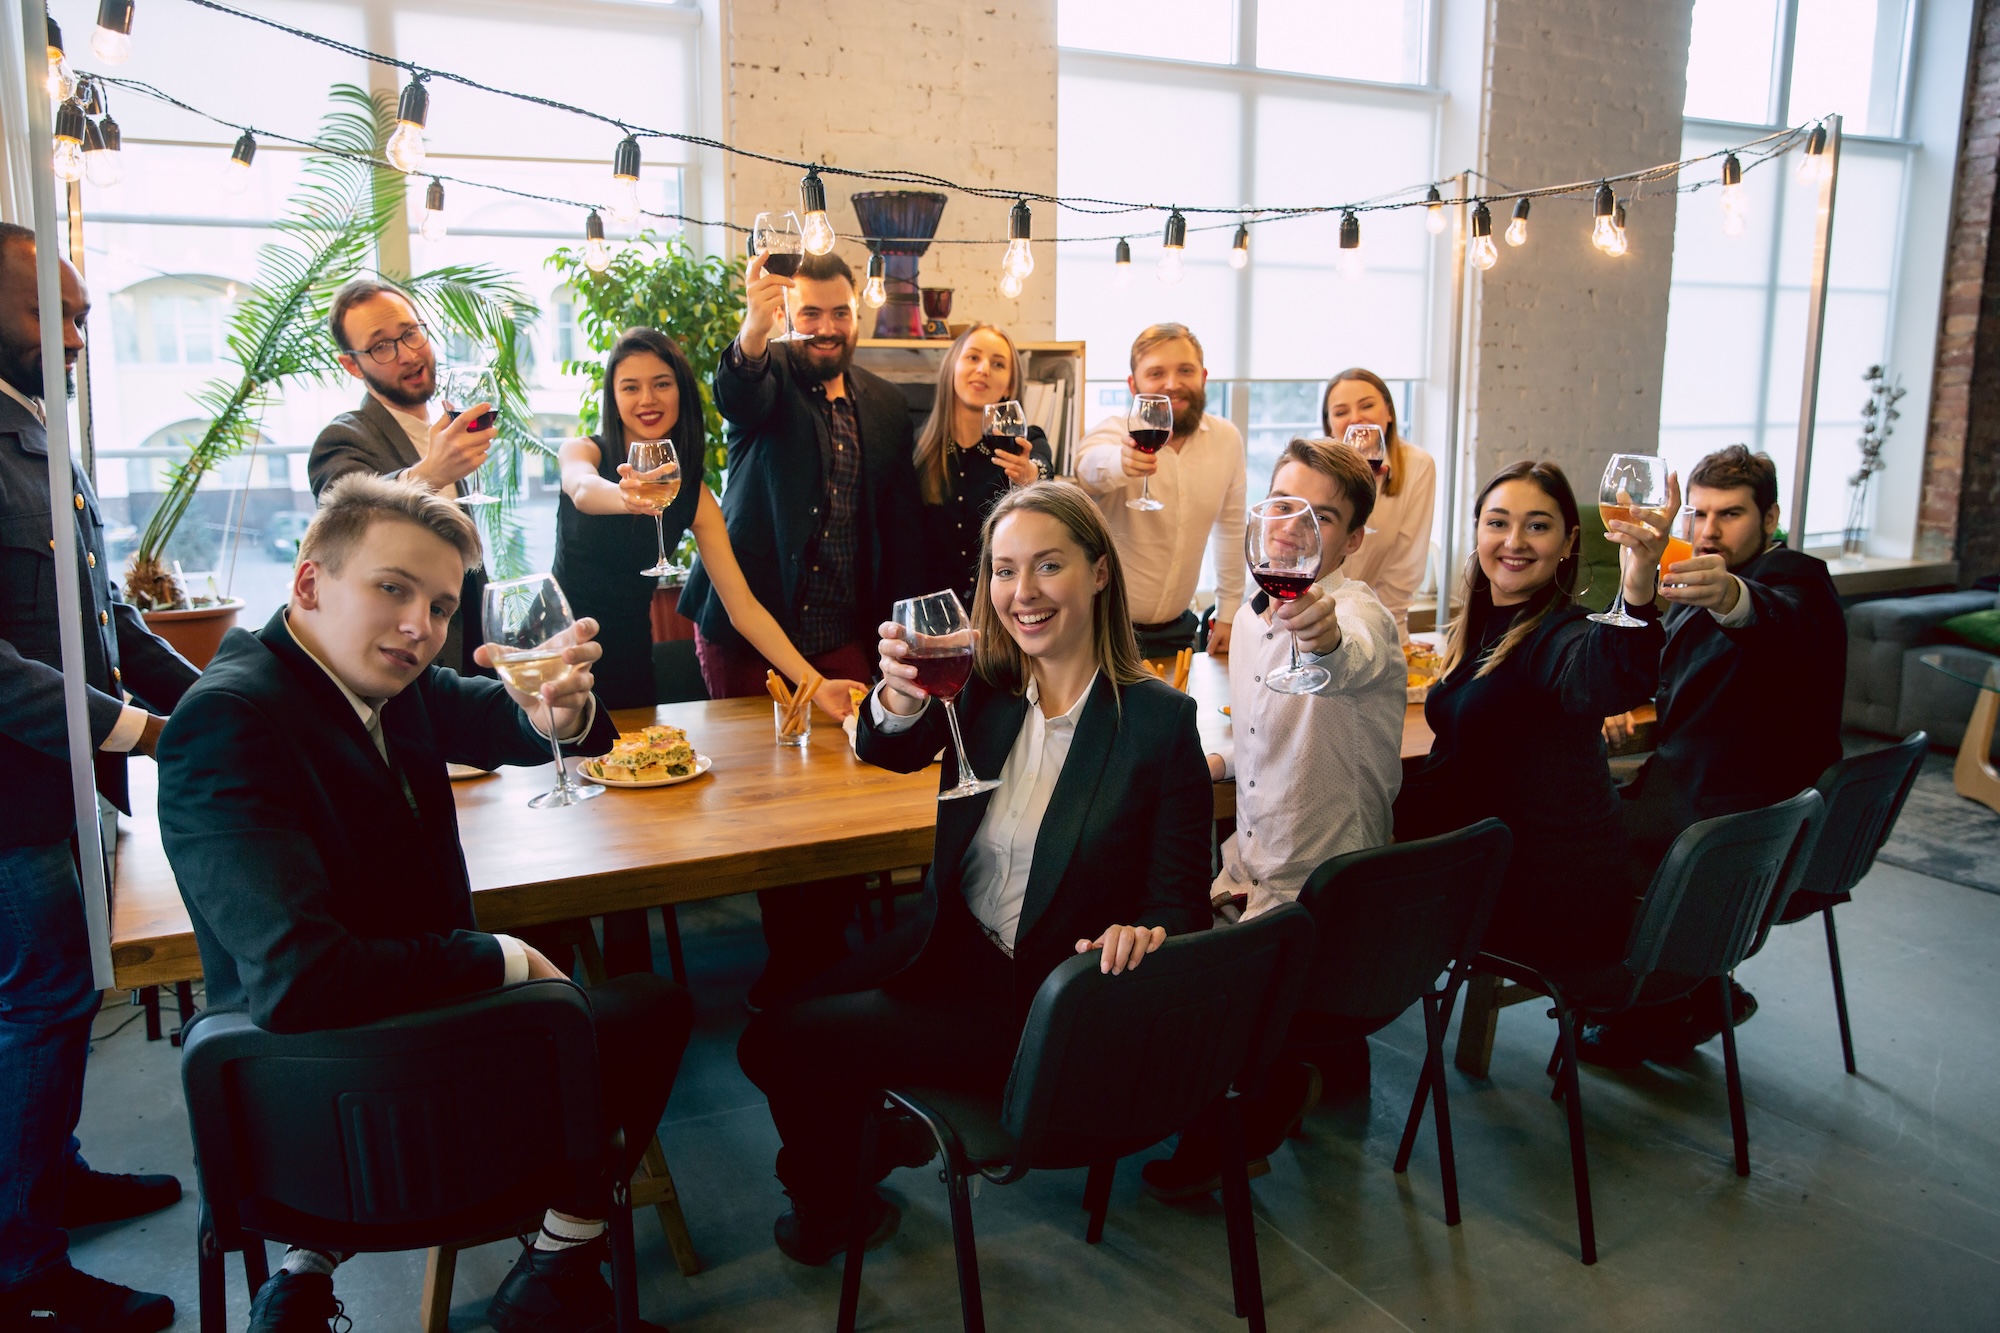 Photograph of a group of coworkers at a board table raising their glasses in a toast.